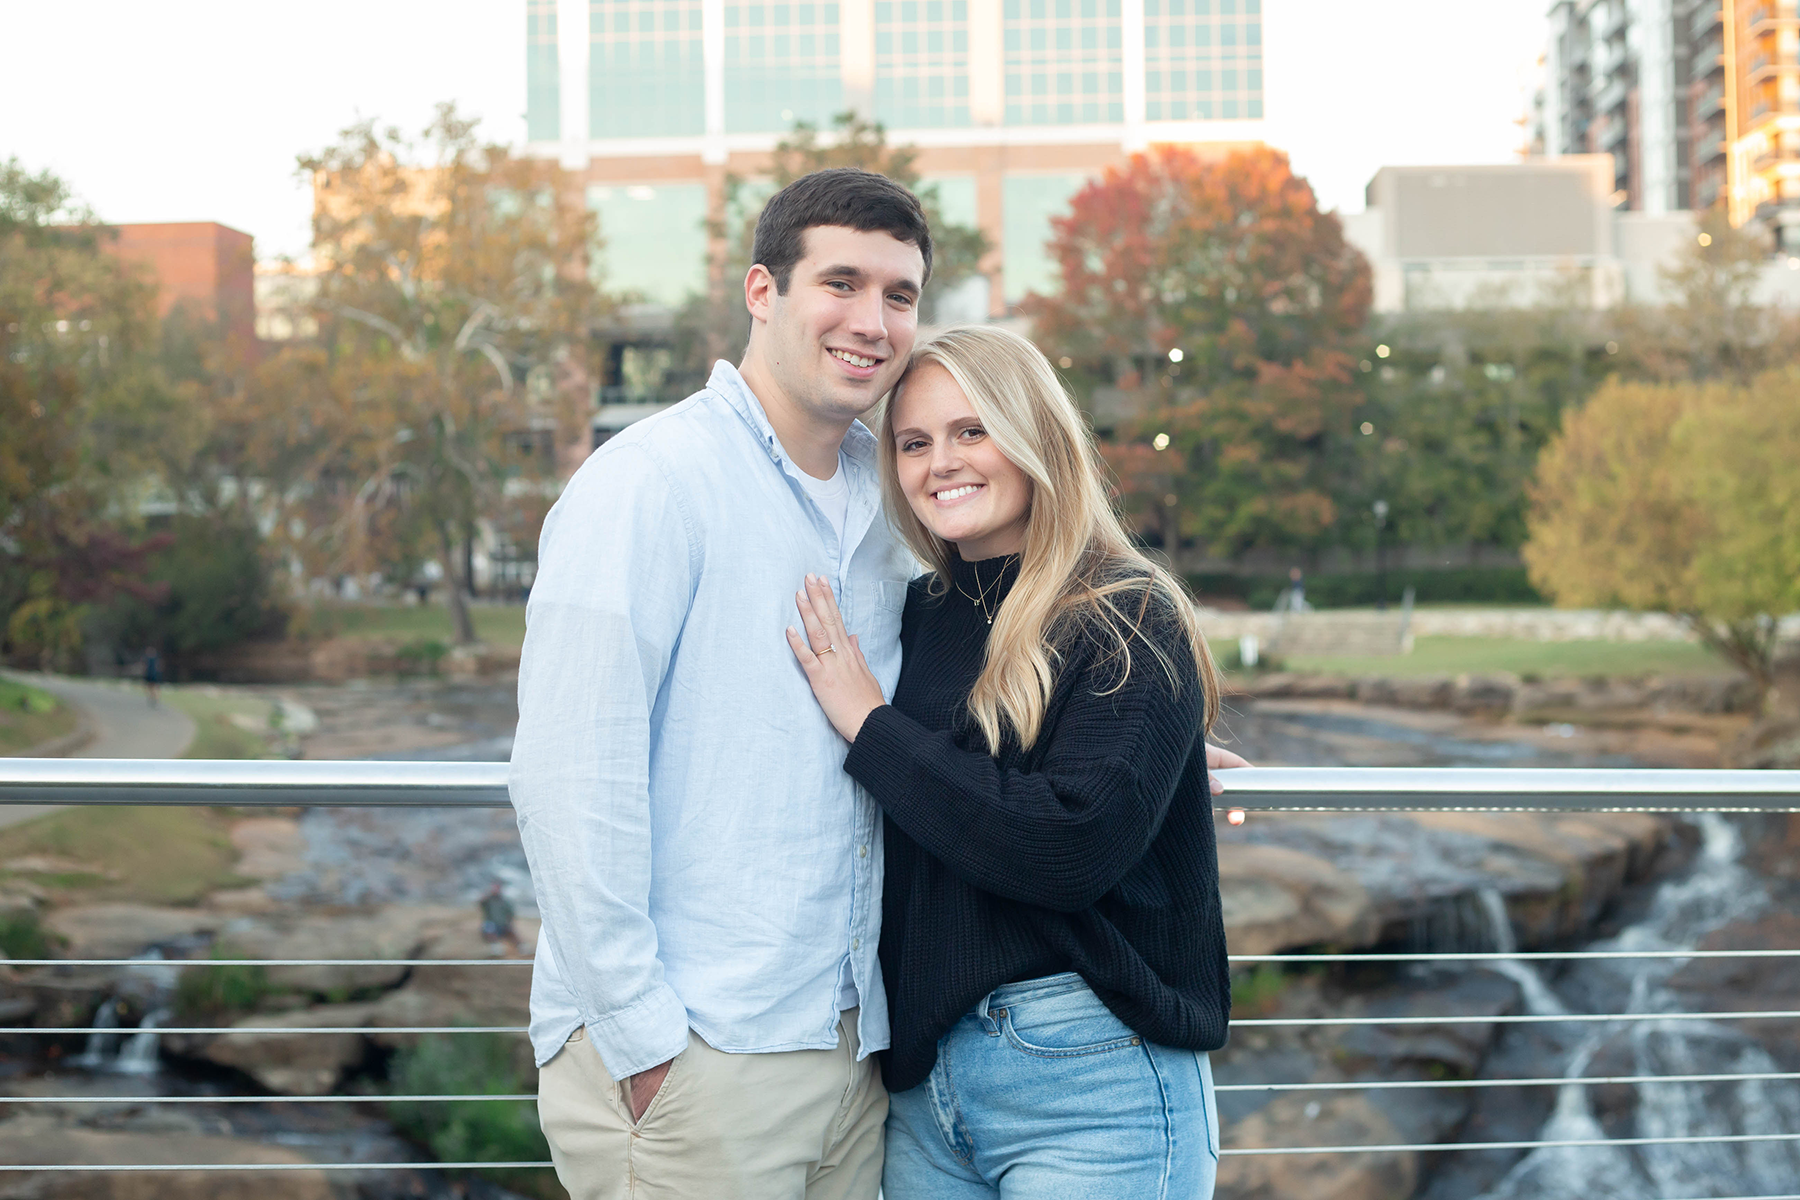 Engagement photos in Greenville, SC | Christine Scott Photography